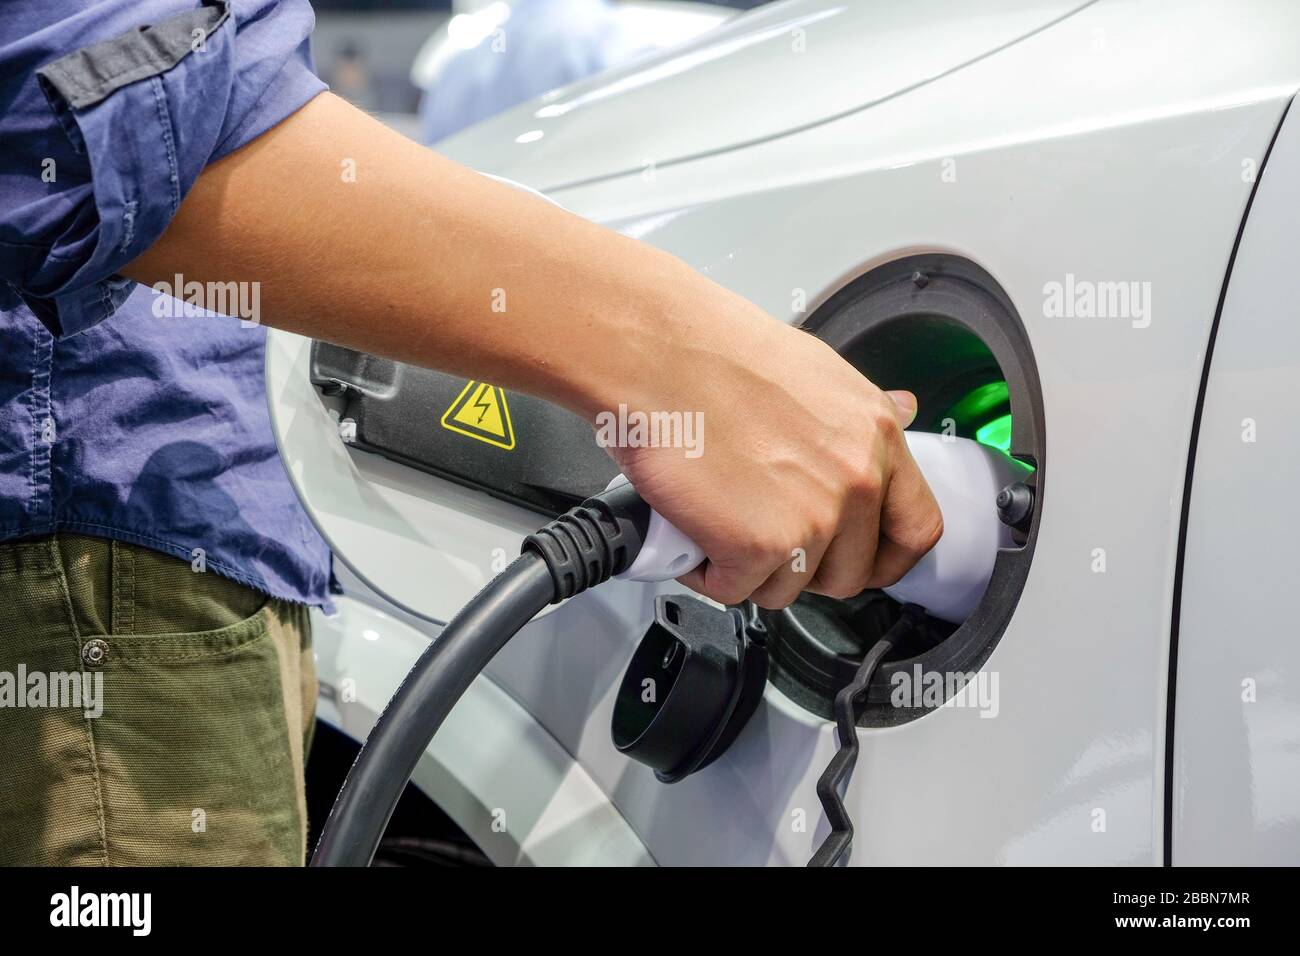 Close-up asia men hands who are fueling a new vehicle electrification via rechargeable electricity machine Stock Photo